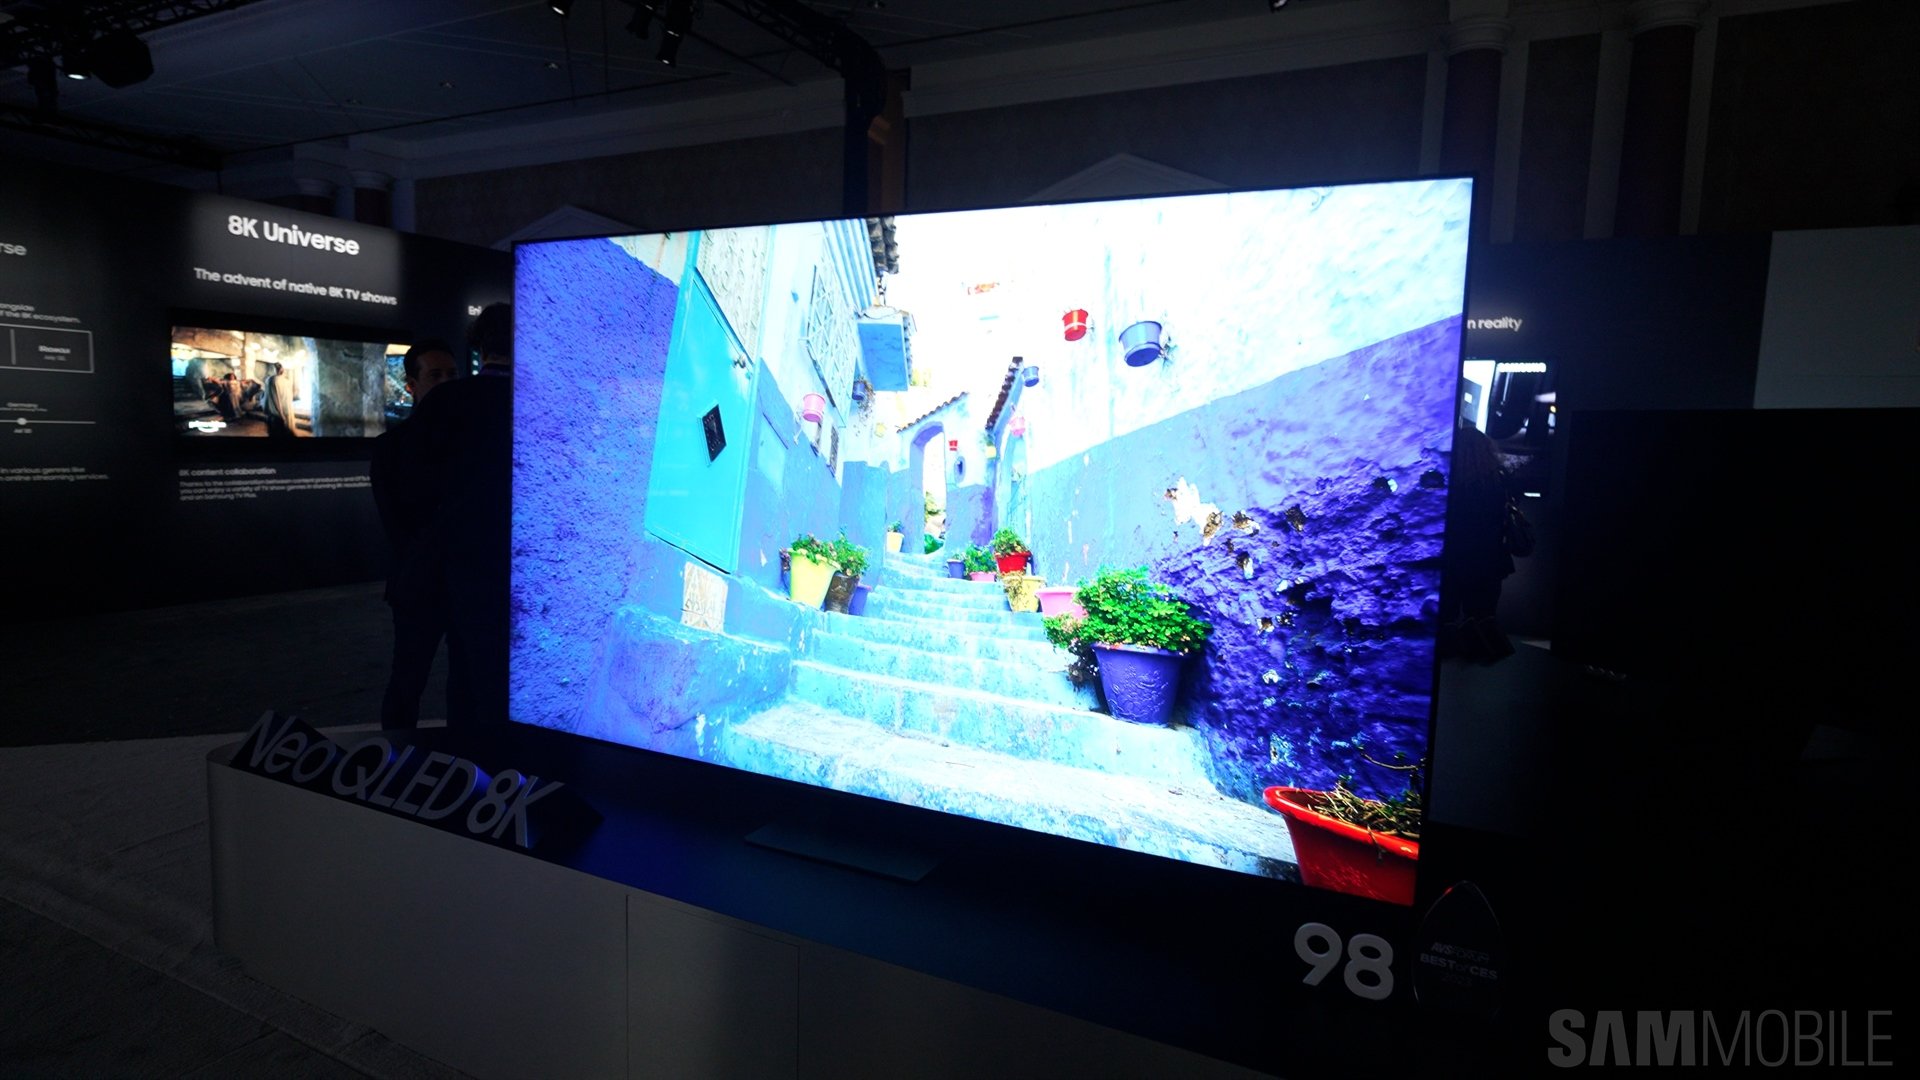 Take That, Samsung: LG Will Announce Eight 'Real' 8K TVs at CES 2020